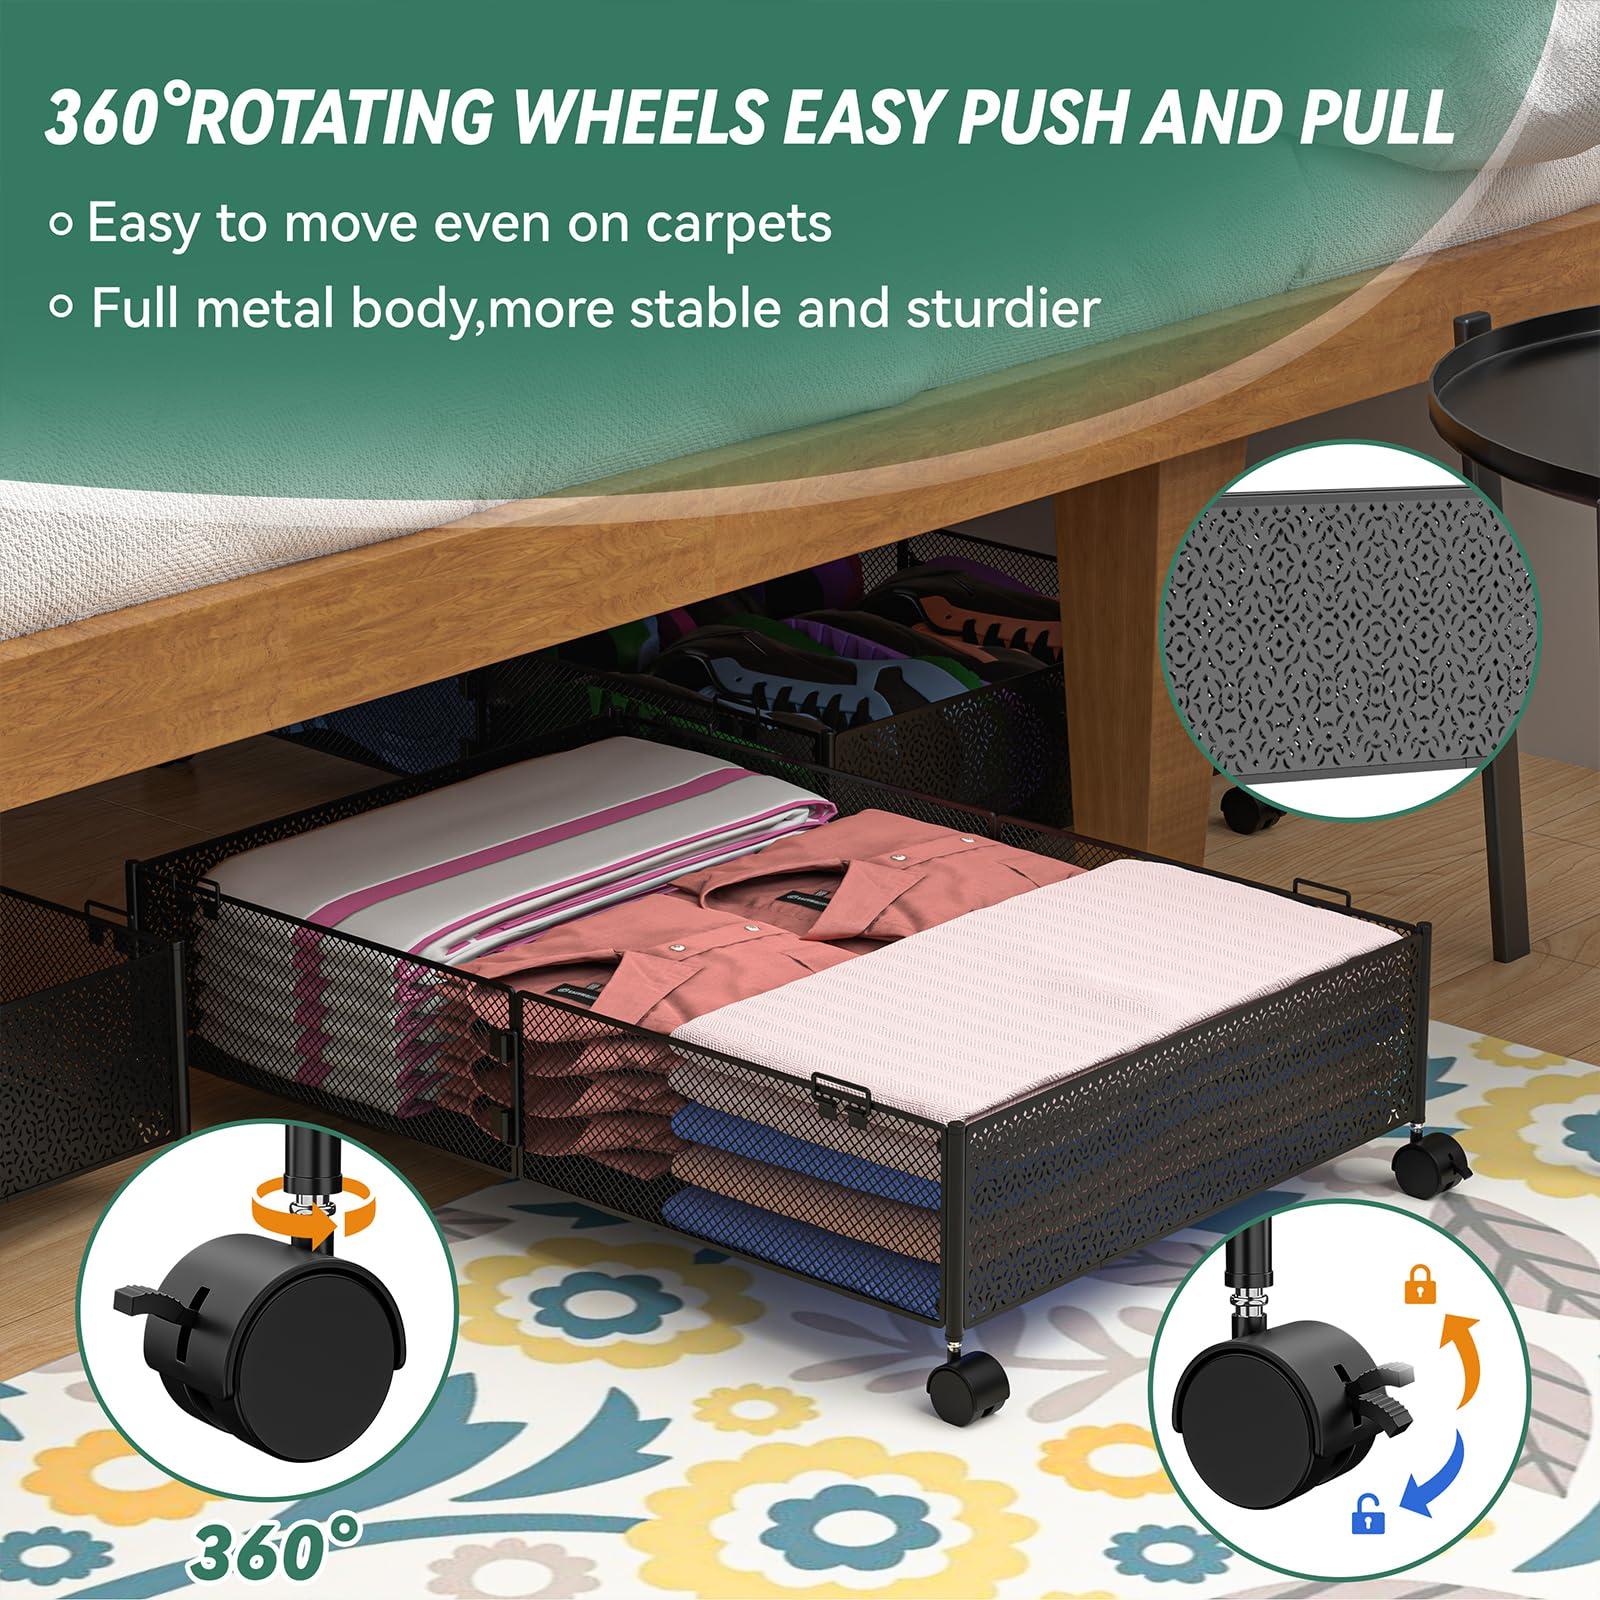 TUMUCUTE Under Bed Storage, Underbed Storage Containers with Wheels, Metal Under the bed storage, Under Bed Storage Organizer for Shoe, Clothes, Blankets, Bedding(2 Pack)